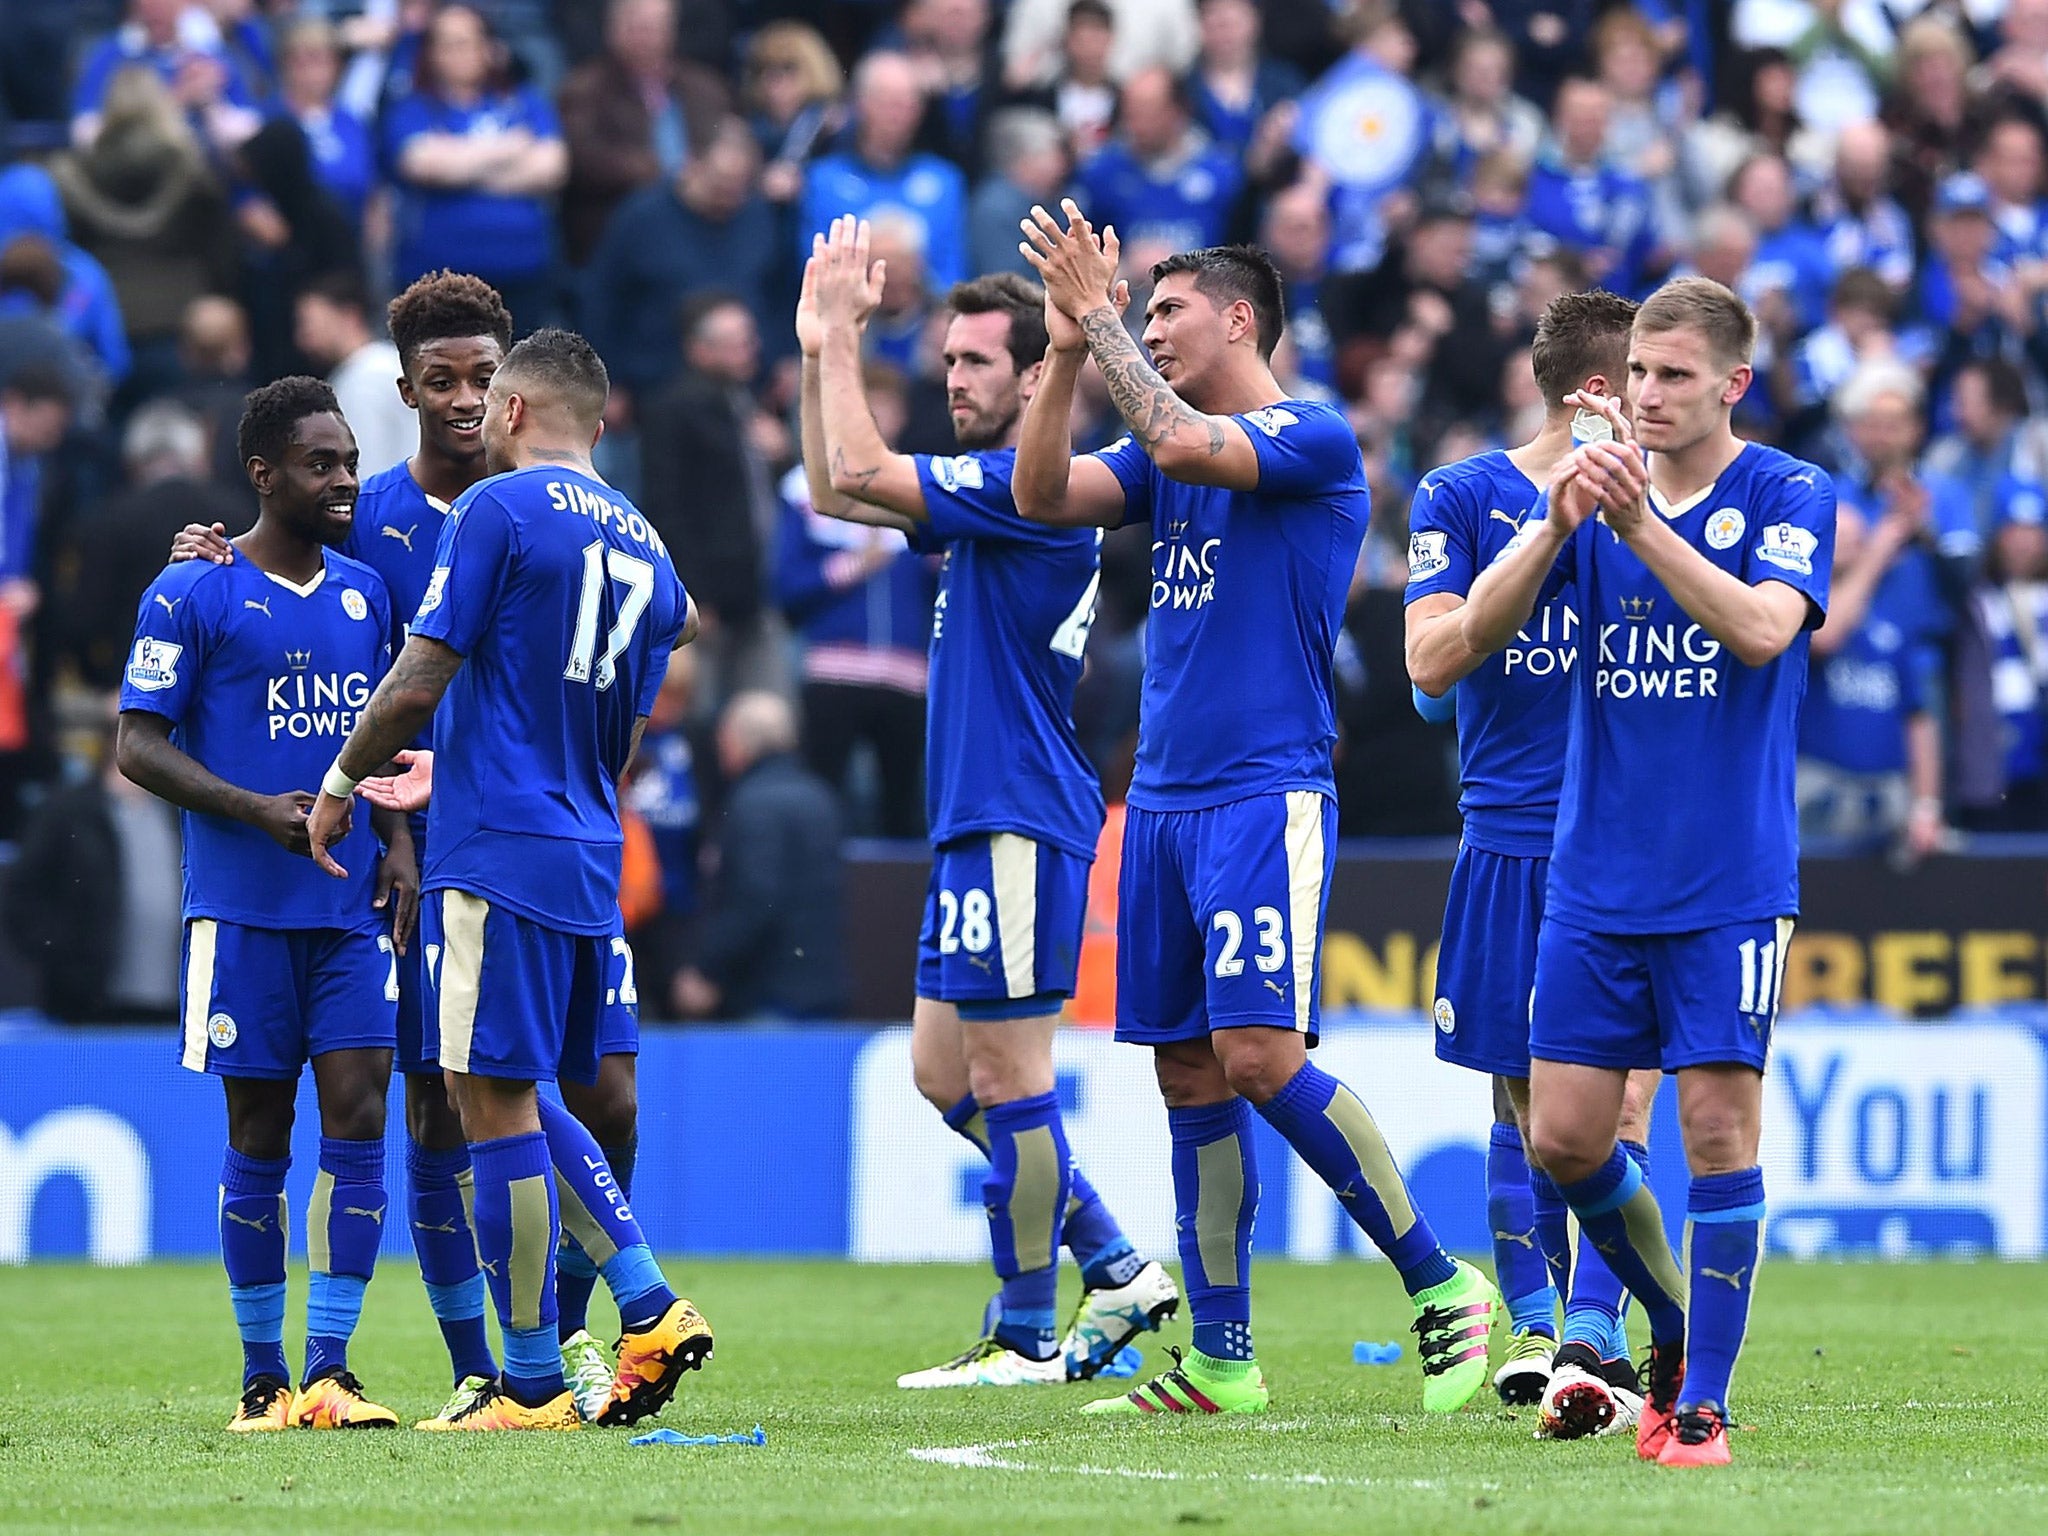 Leicester players applaud the fans after their 2-0 win over Sunderland (Getty)